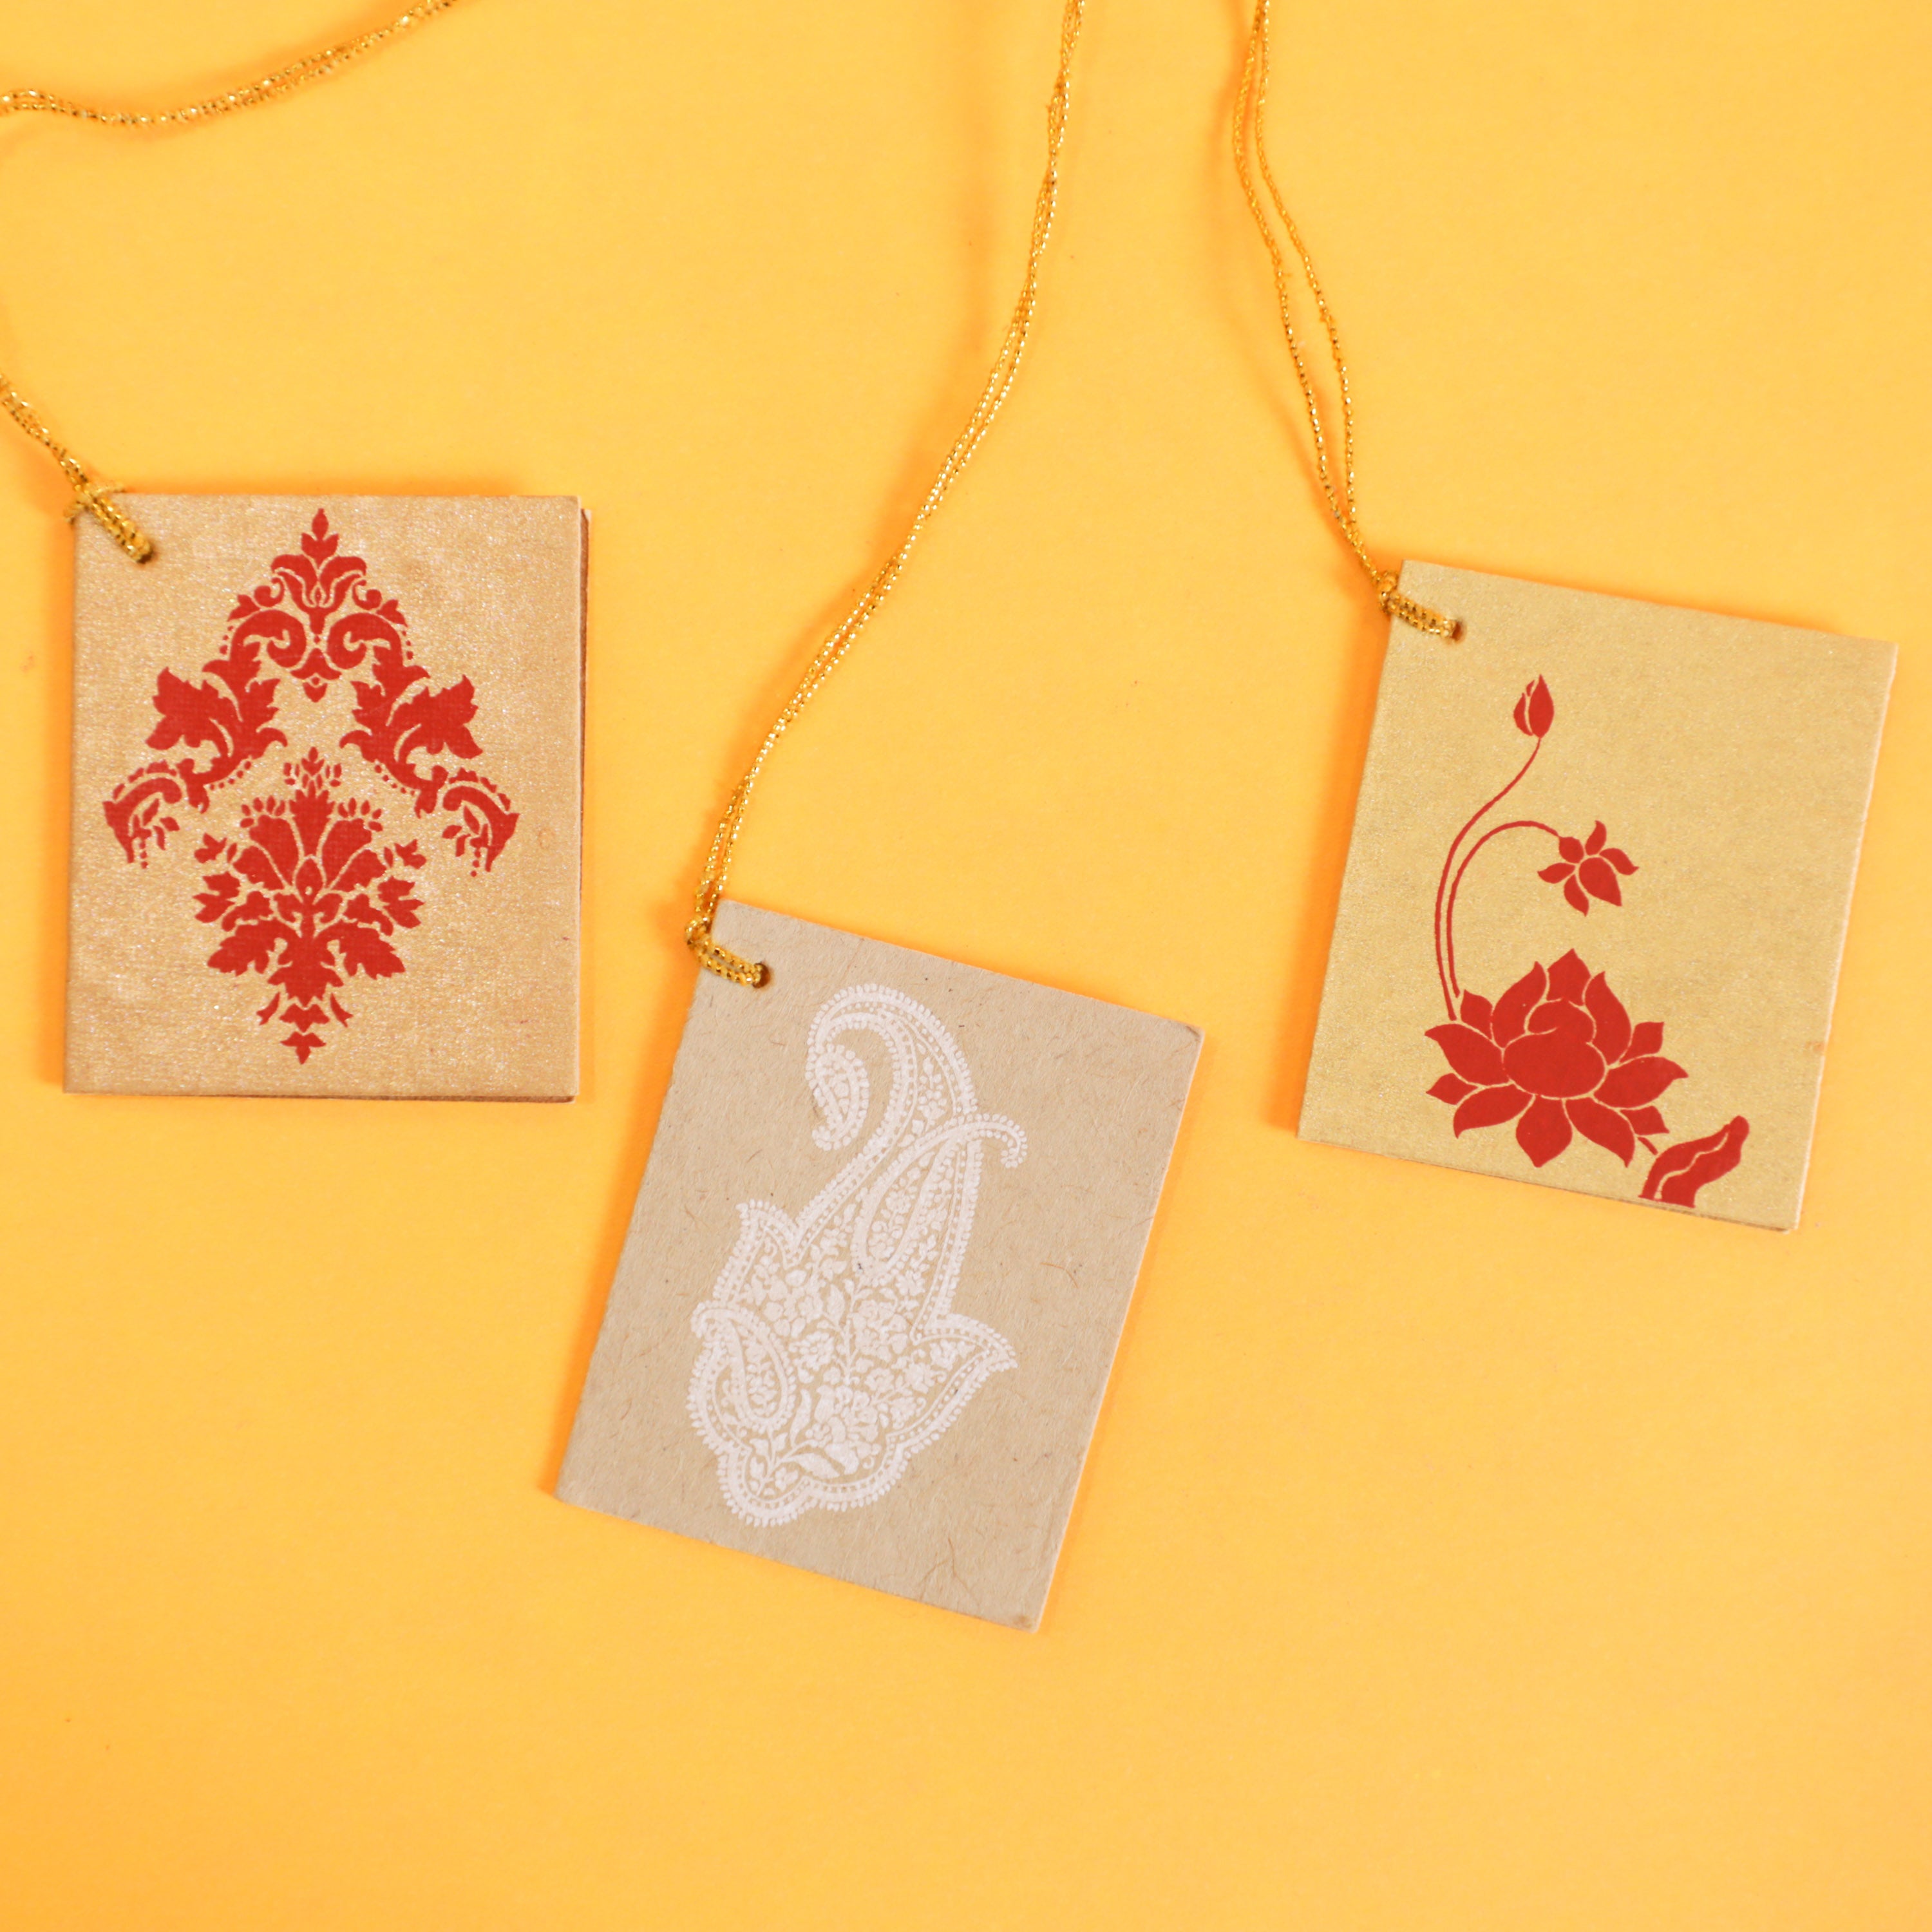 Set your gift apart from others with lush filled mesmerizing gift tags